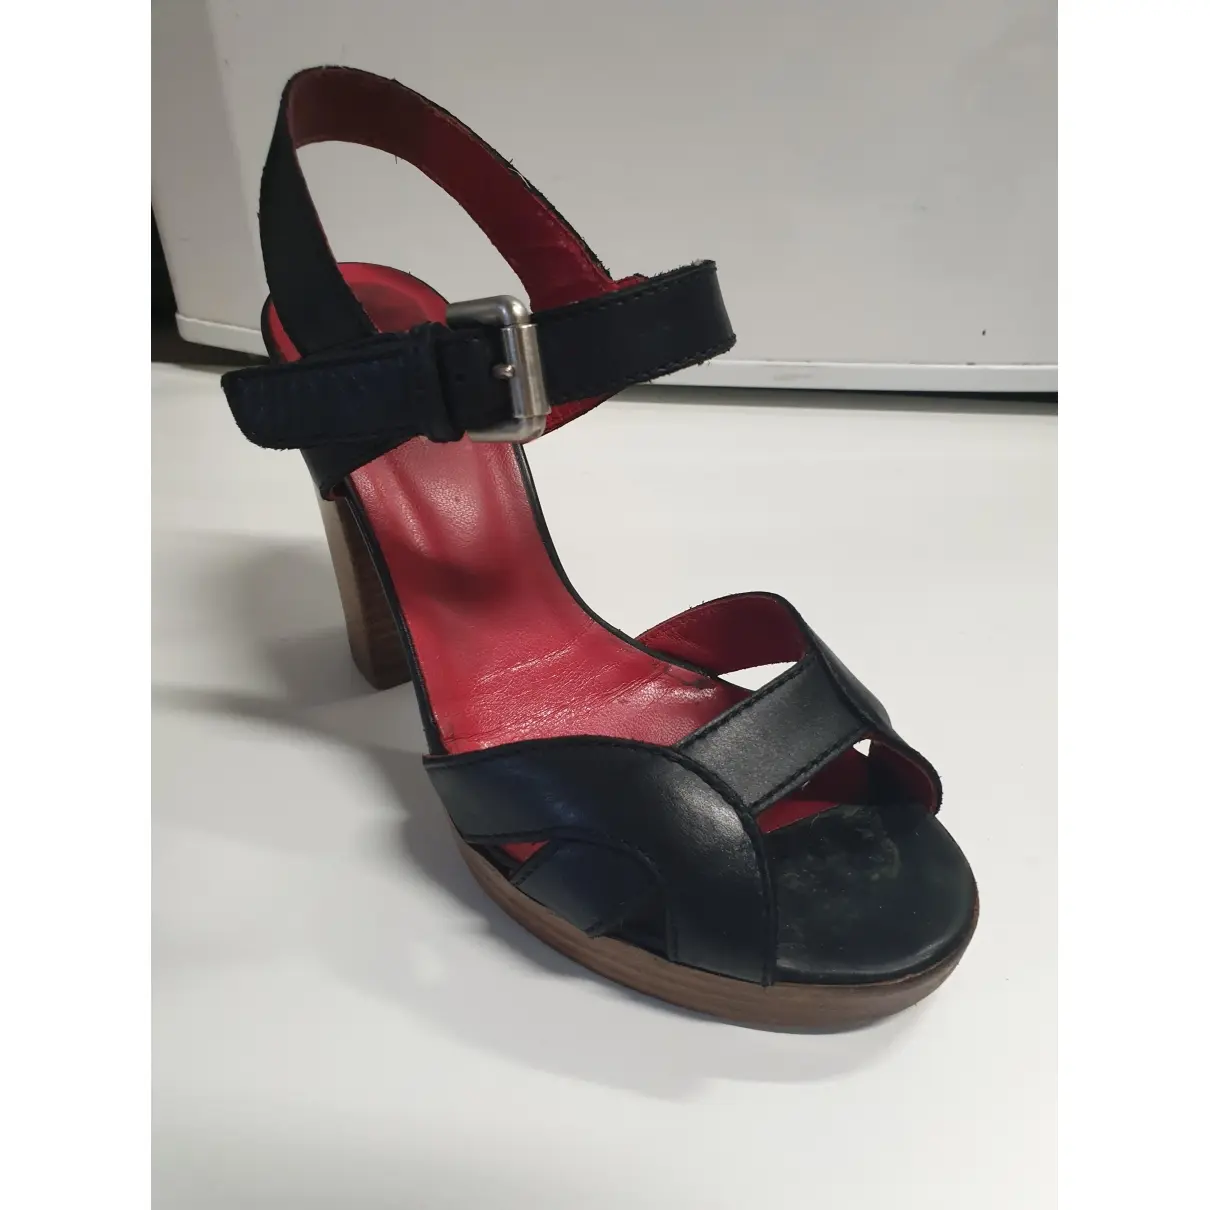 Sergio Rossi Leather sandal for sale